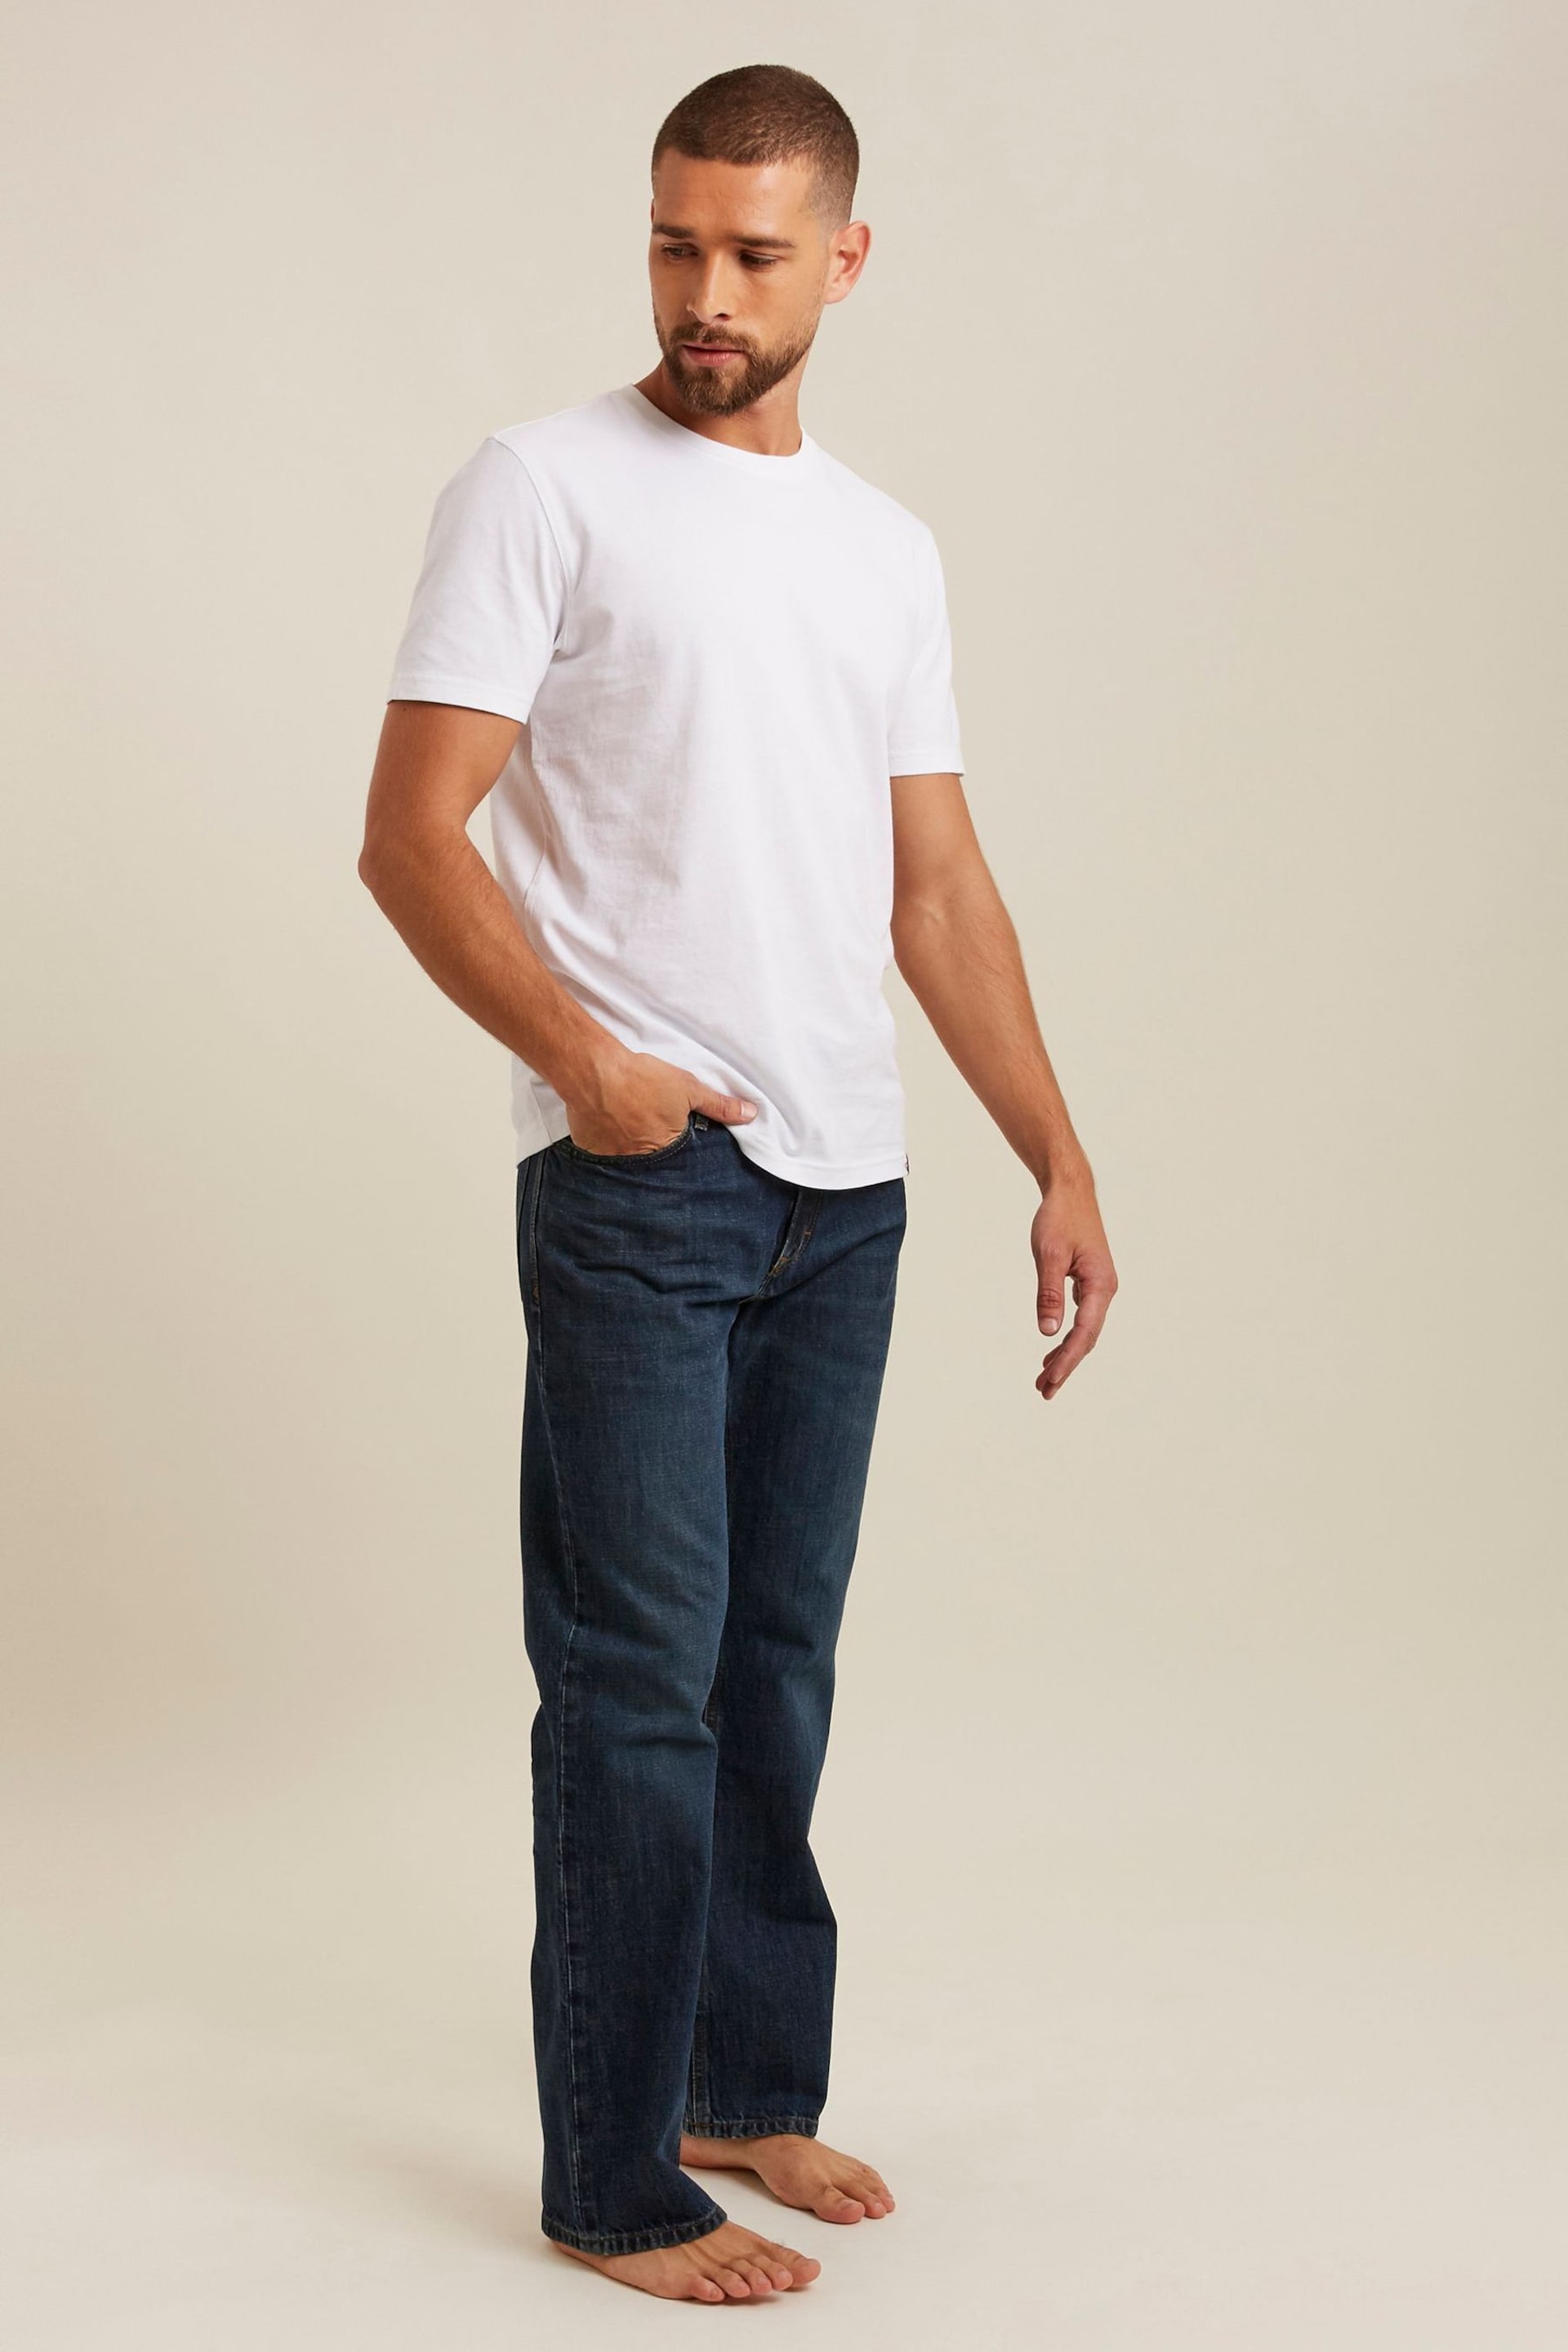 FatFace Mid Wash Denim Bootcut Jeans - Image 1 of 5